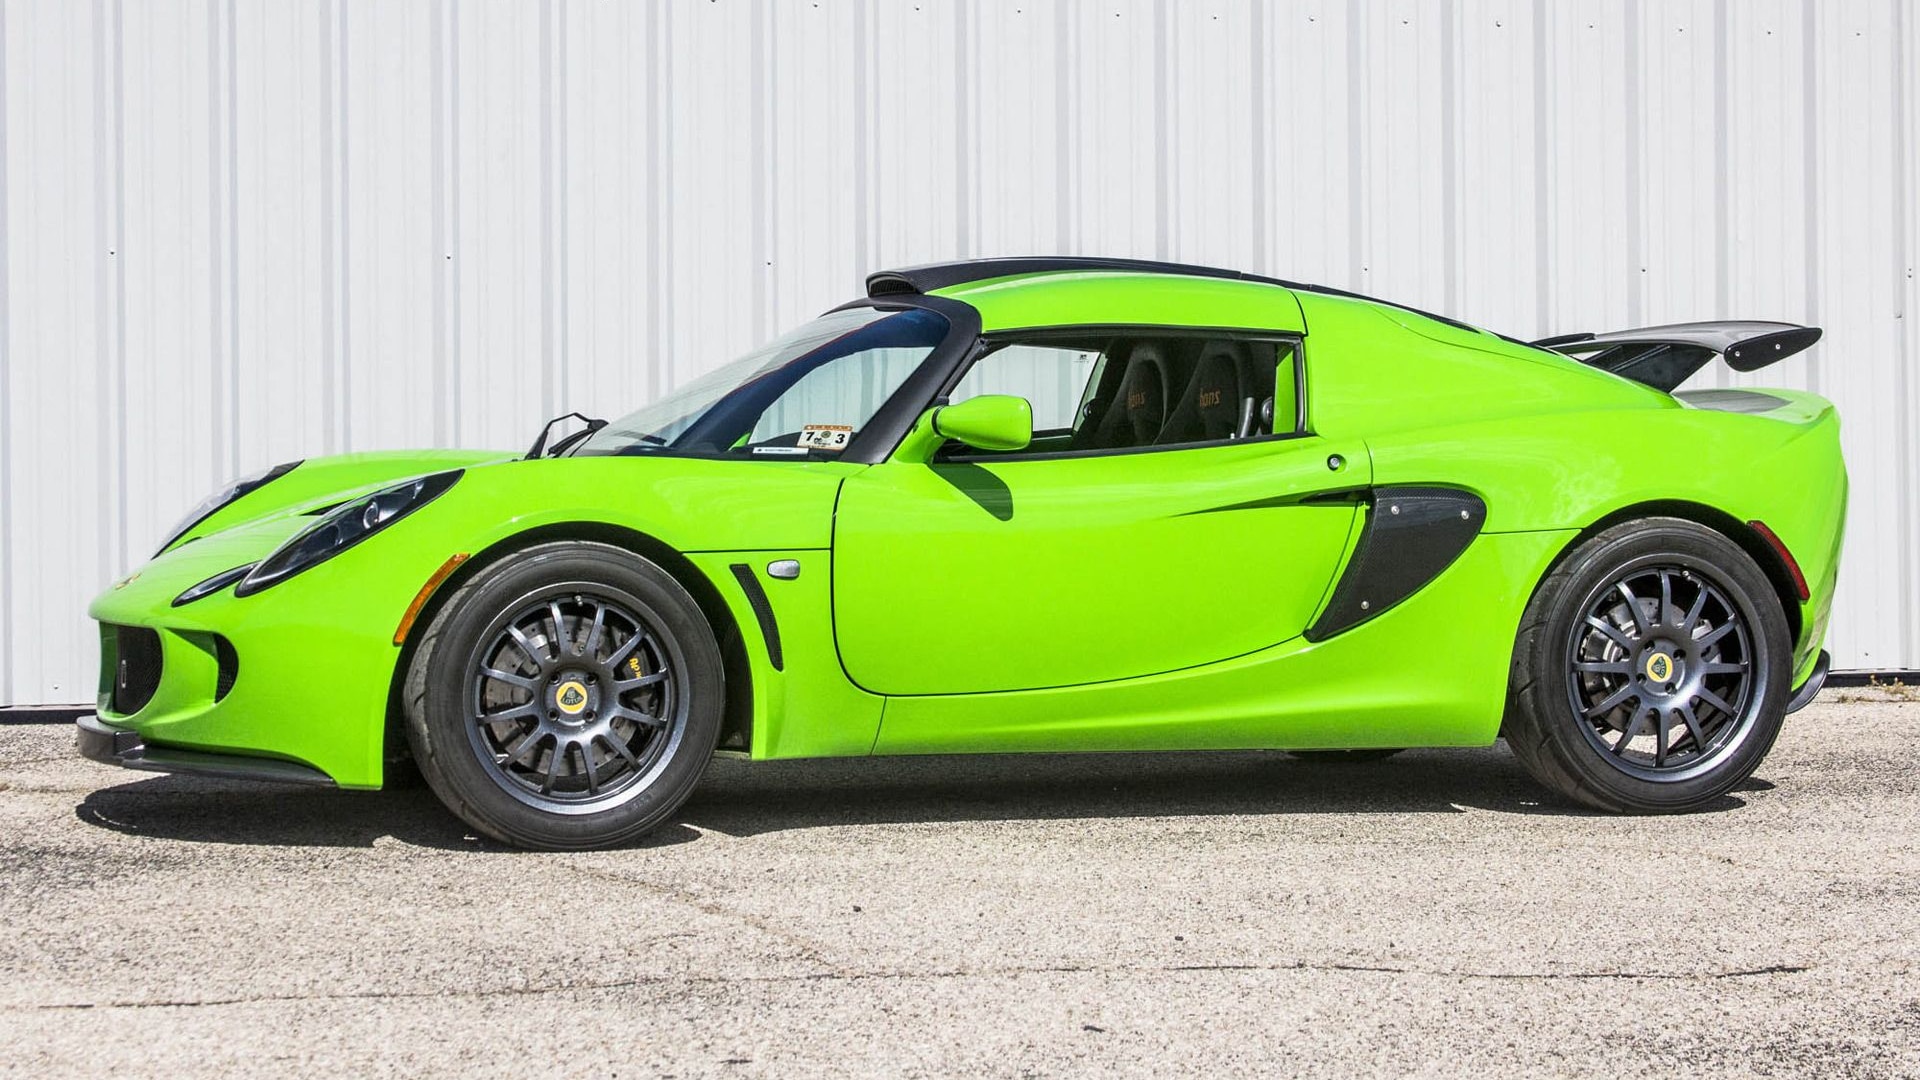 2009 Lotus Exige S 260 once owned by Jerry Seinfeld - Image via Dan Kruse Classics